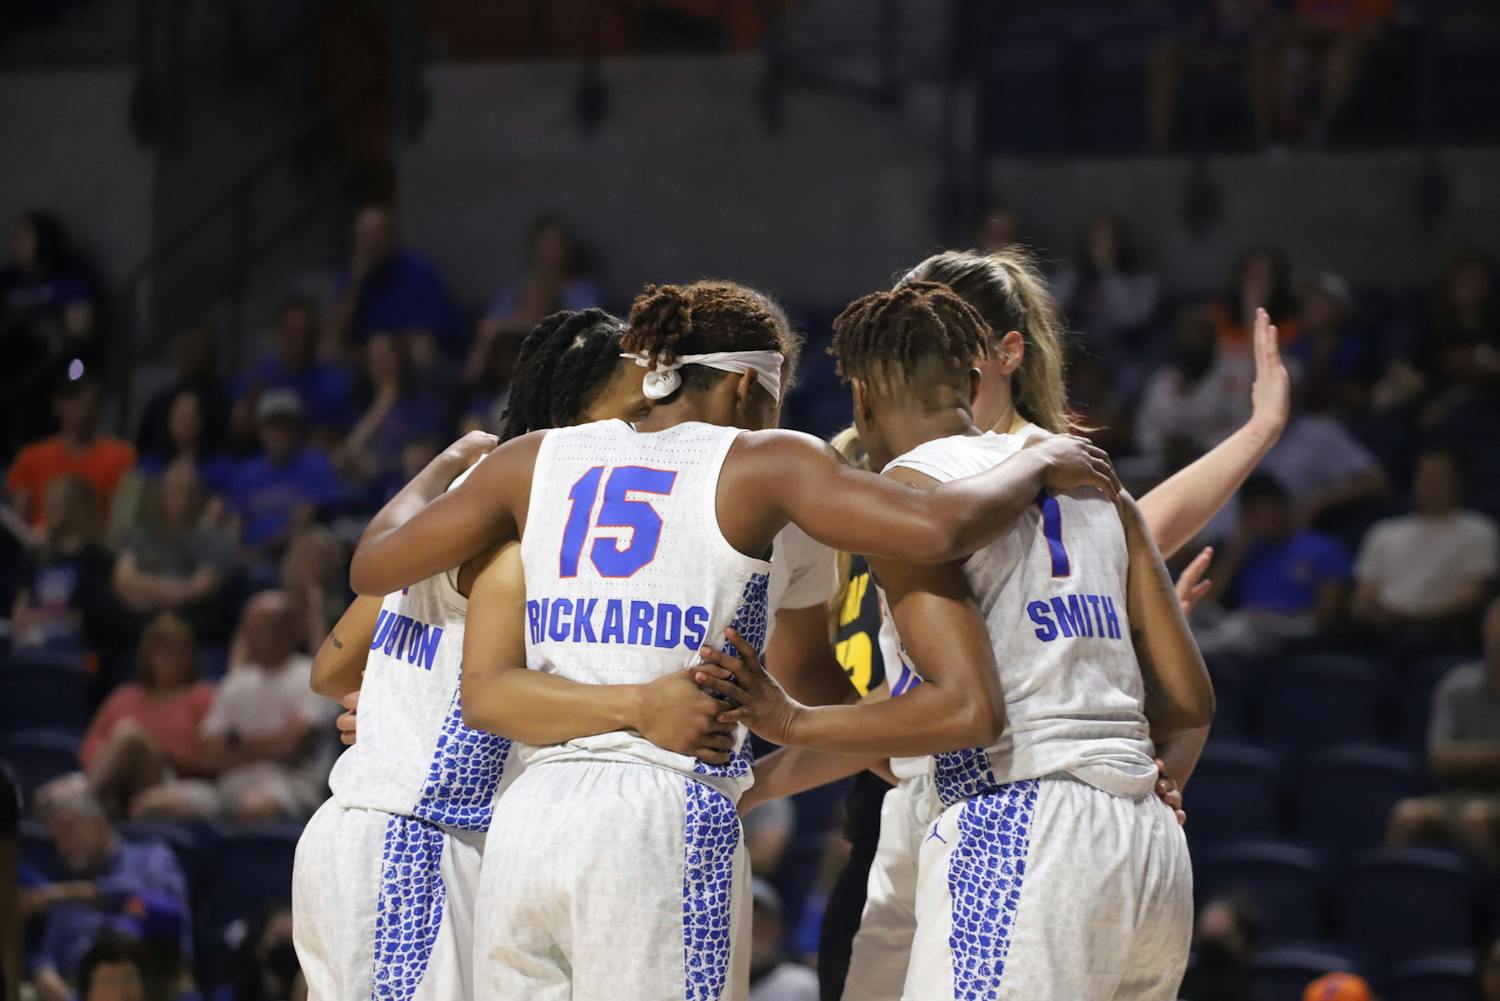 Florida women’s basketball added a new coach to its staff Tuesday, as Jackie Moore was named assistant to the head coach.